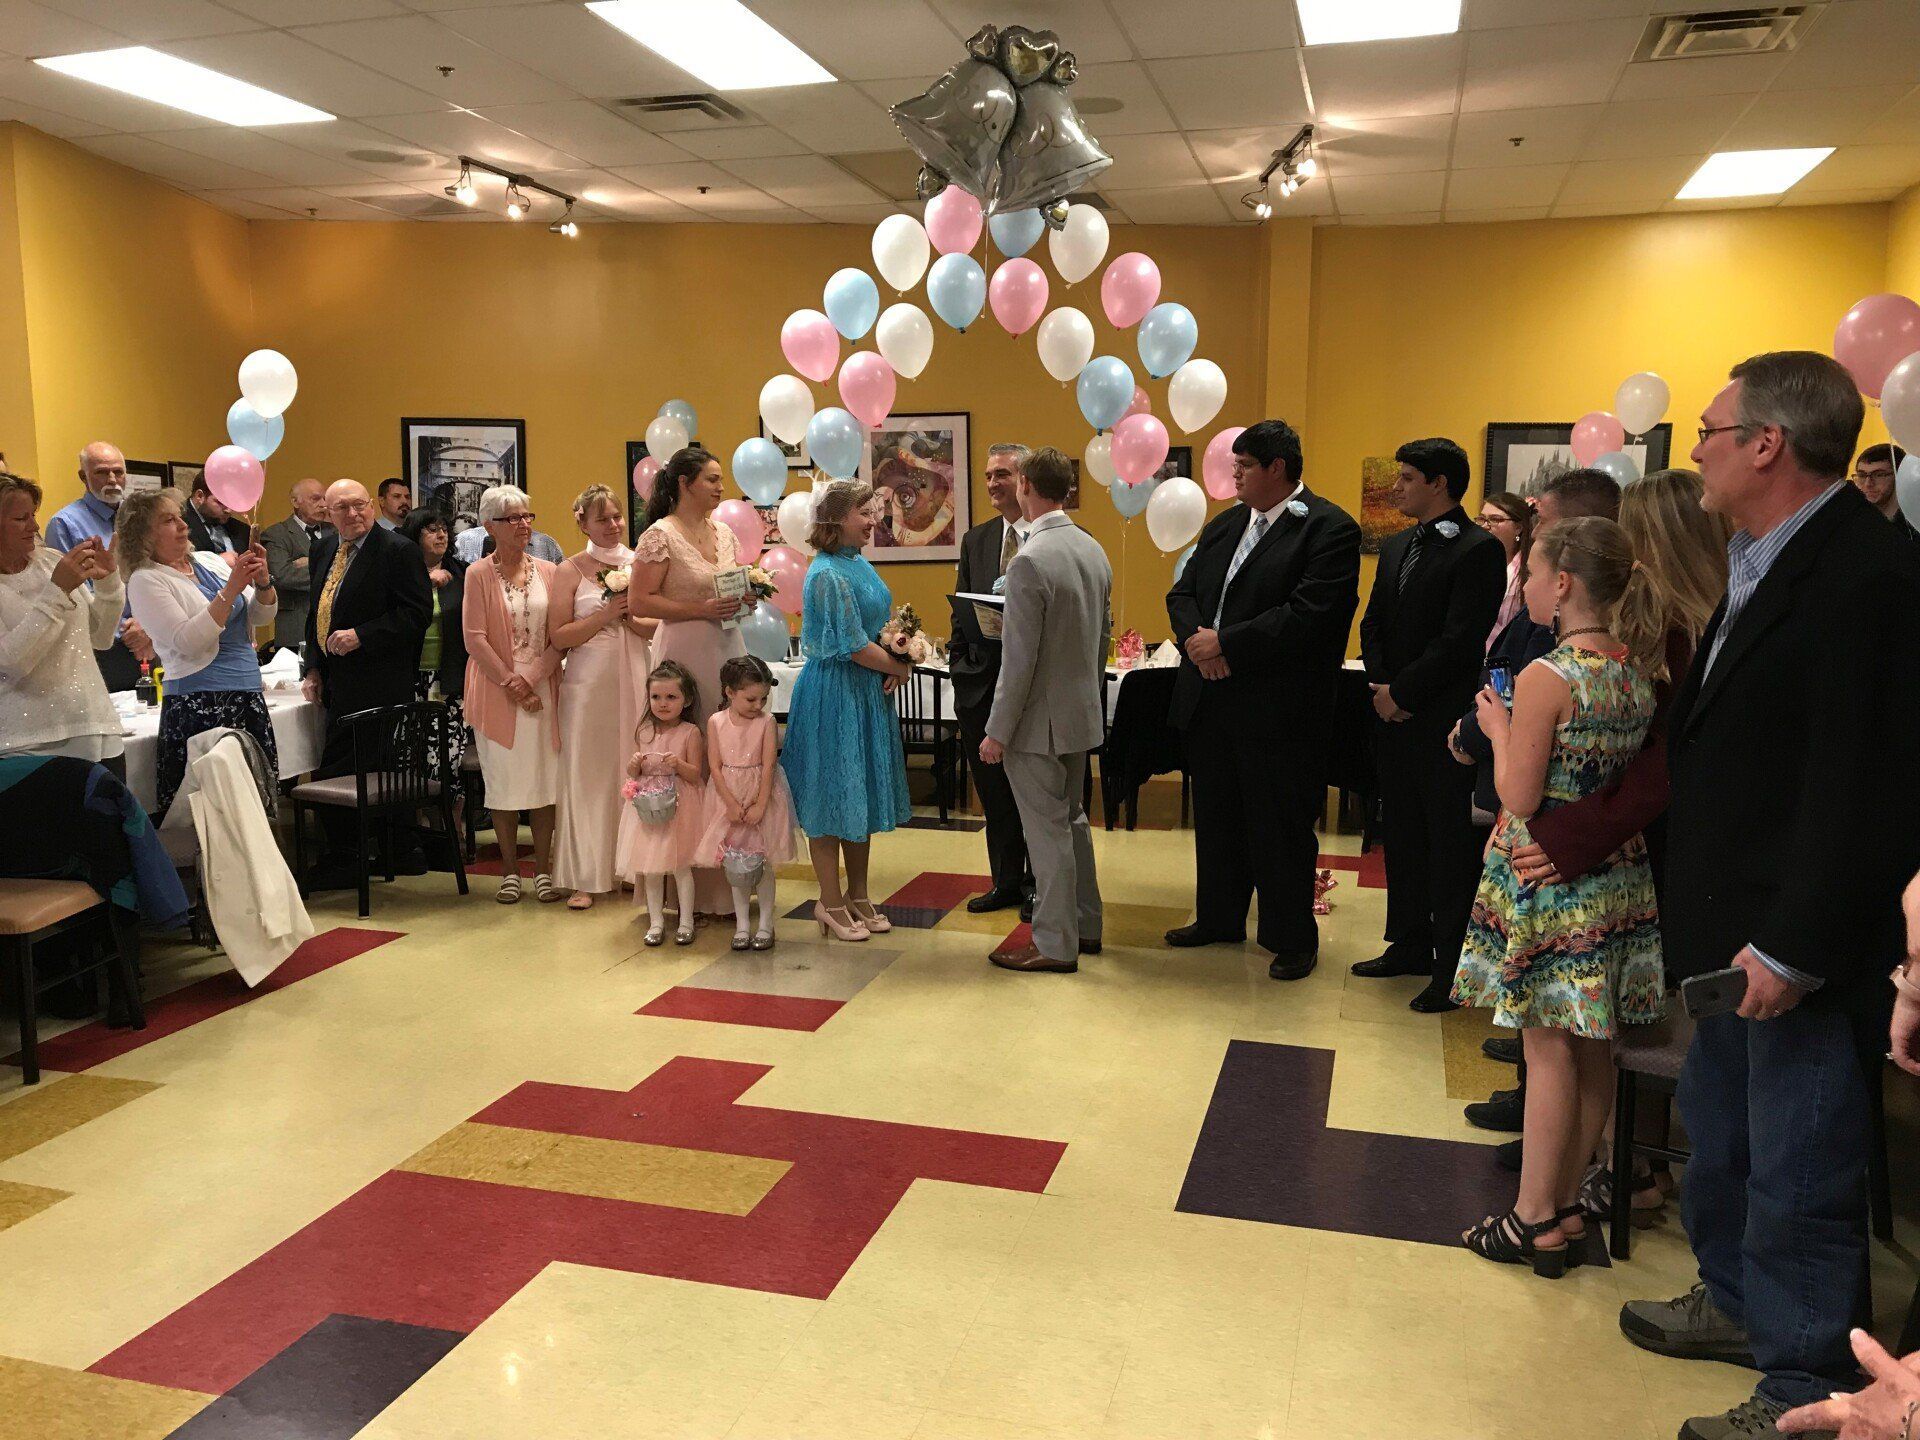 a group of people are standing in a room with balloons .